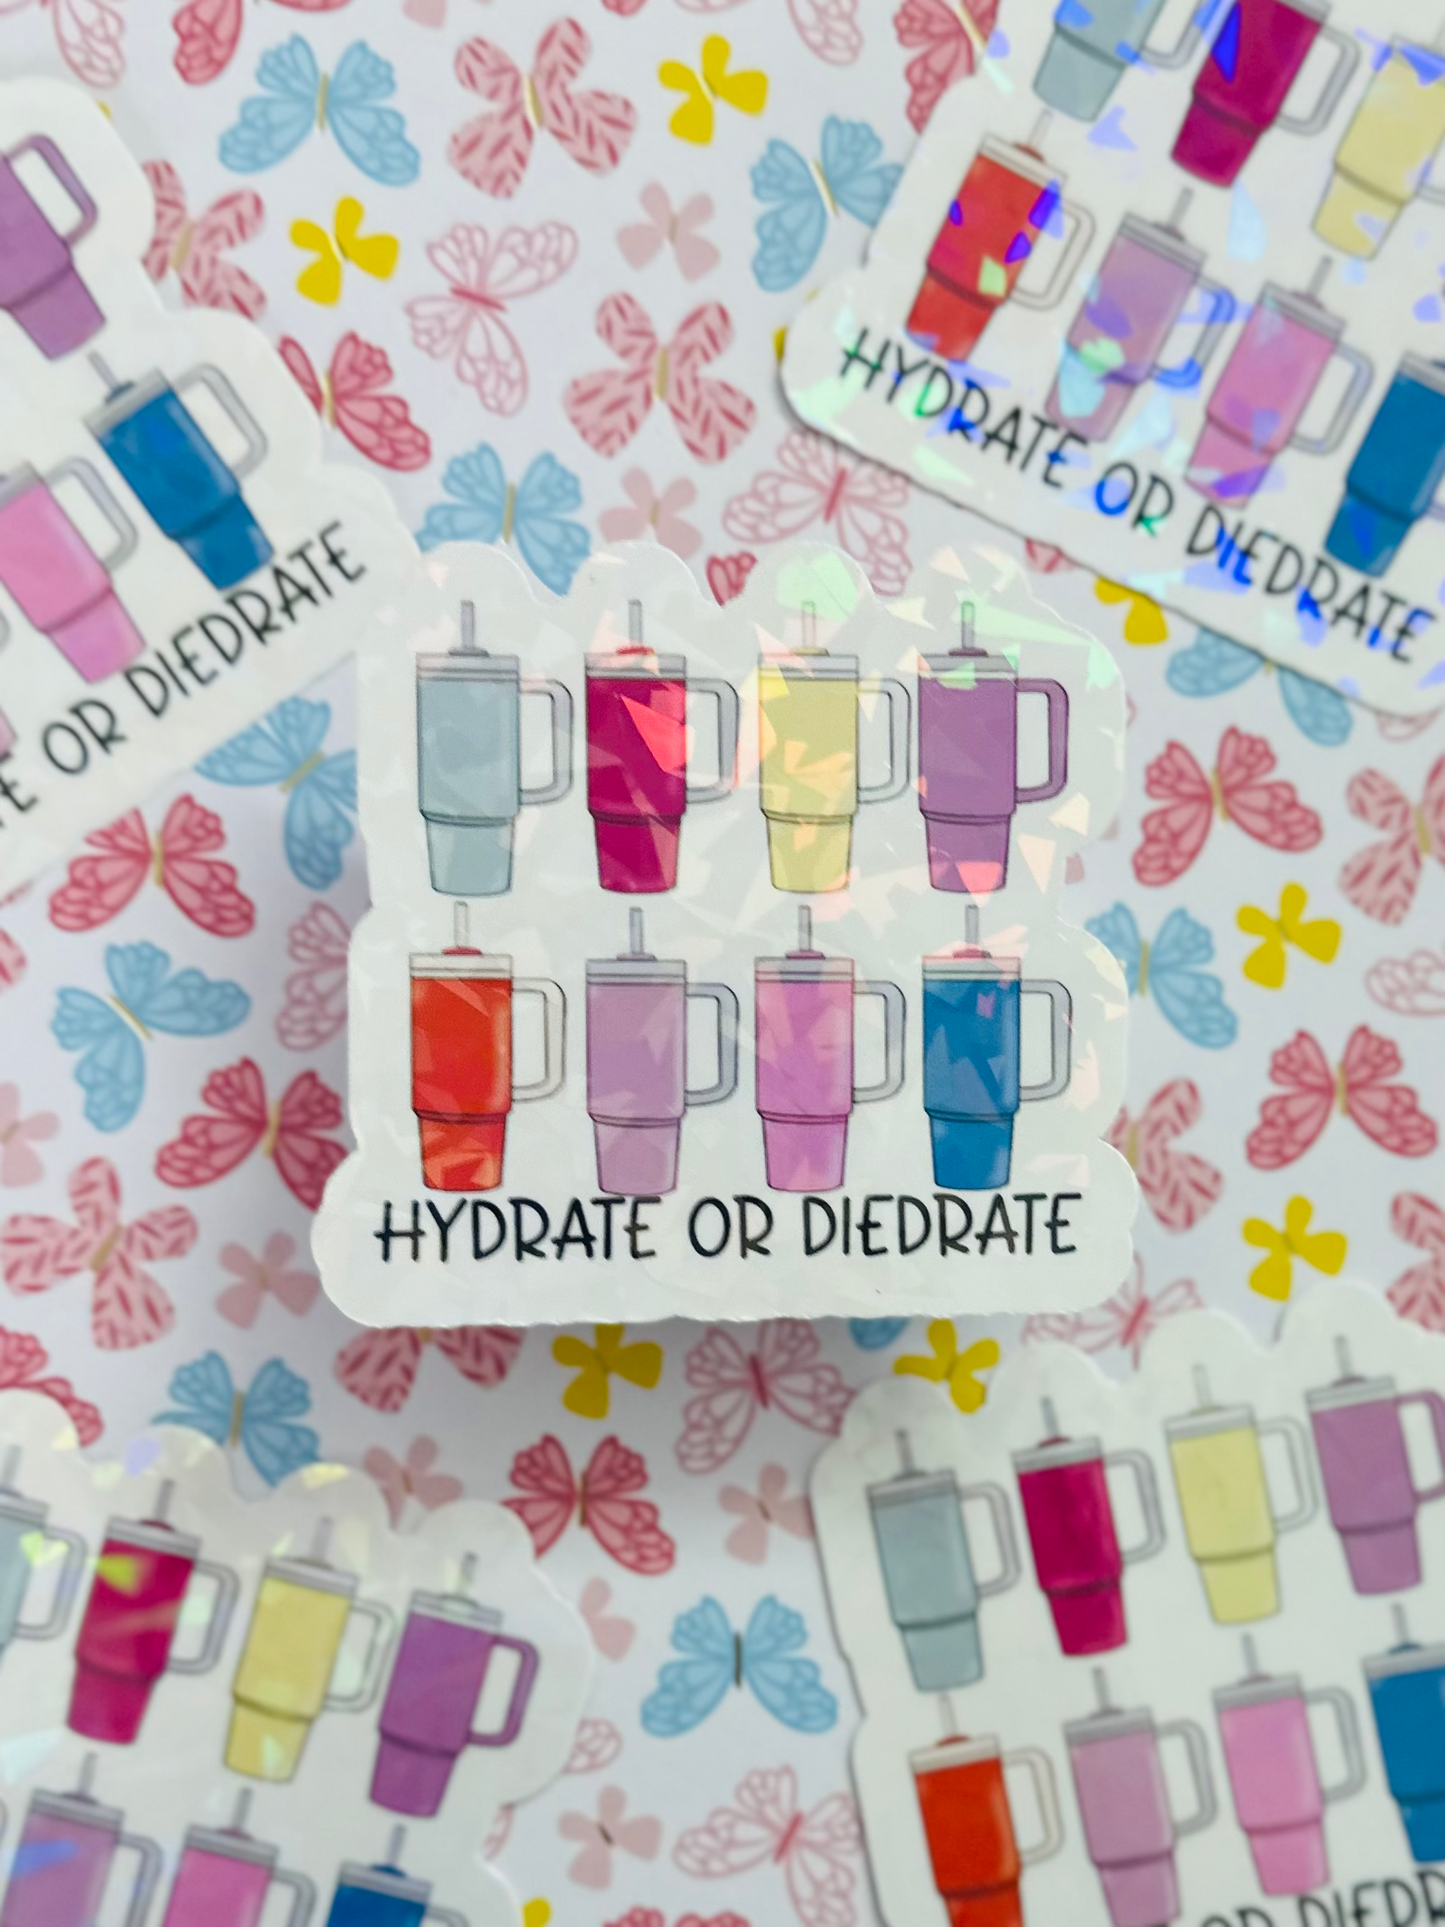 Hydrate Or Diedrate Holographic Sticker